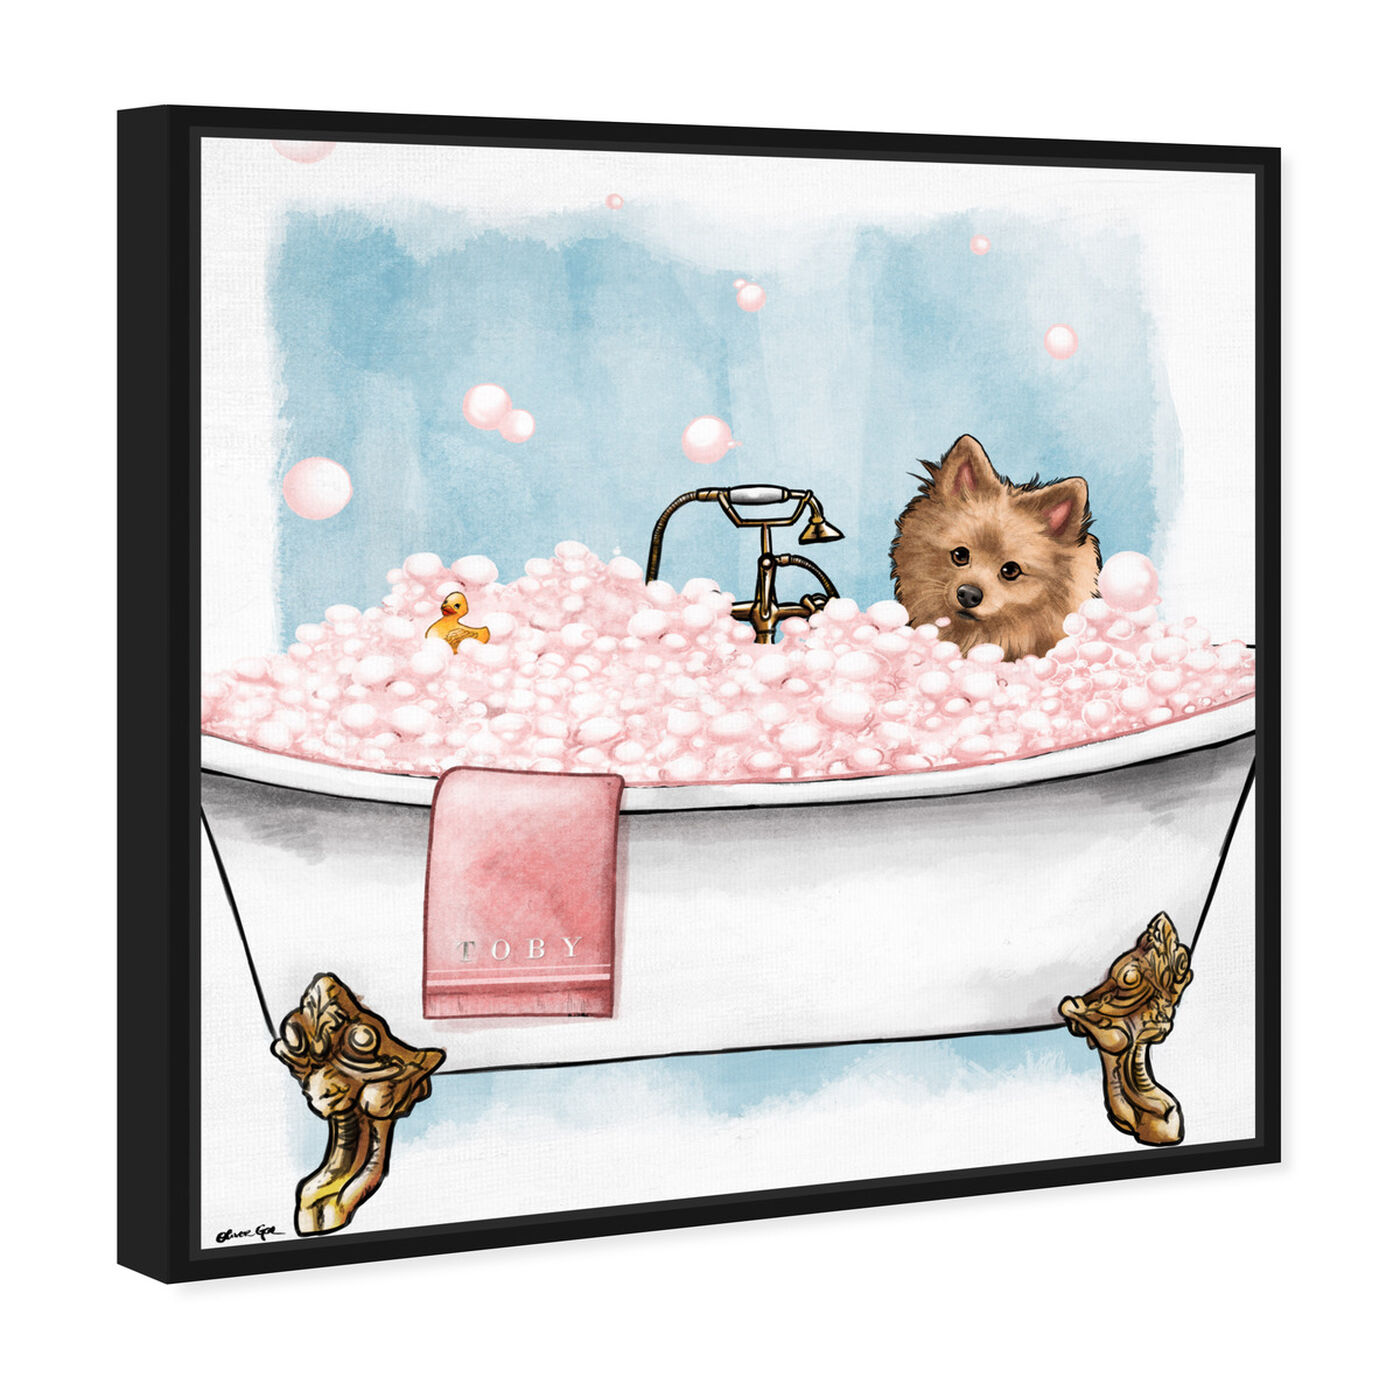 Angled view of Pet in the tub featuring bath and laundry and bathtubs art.